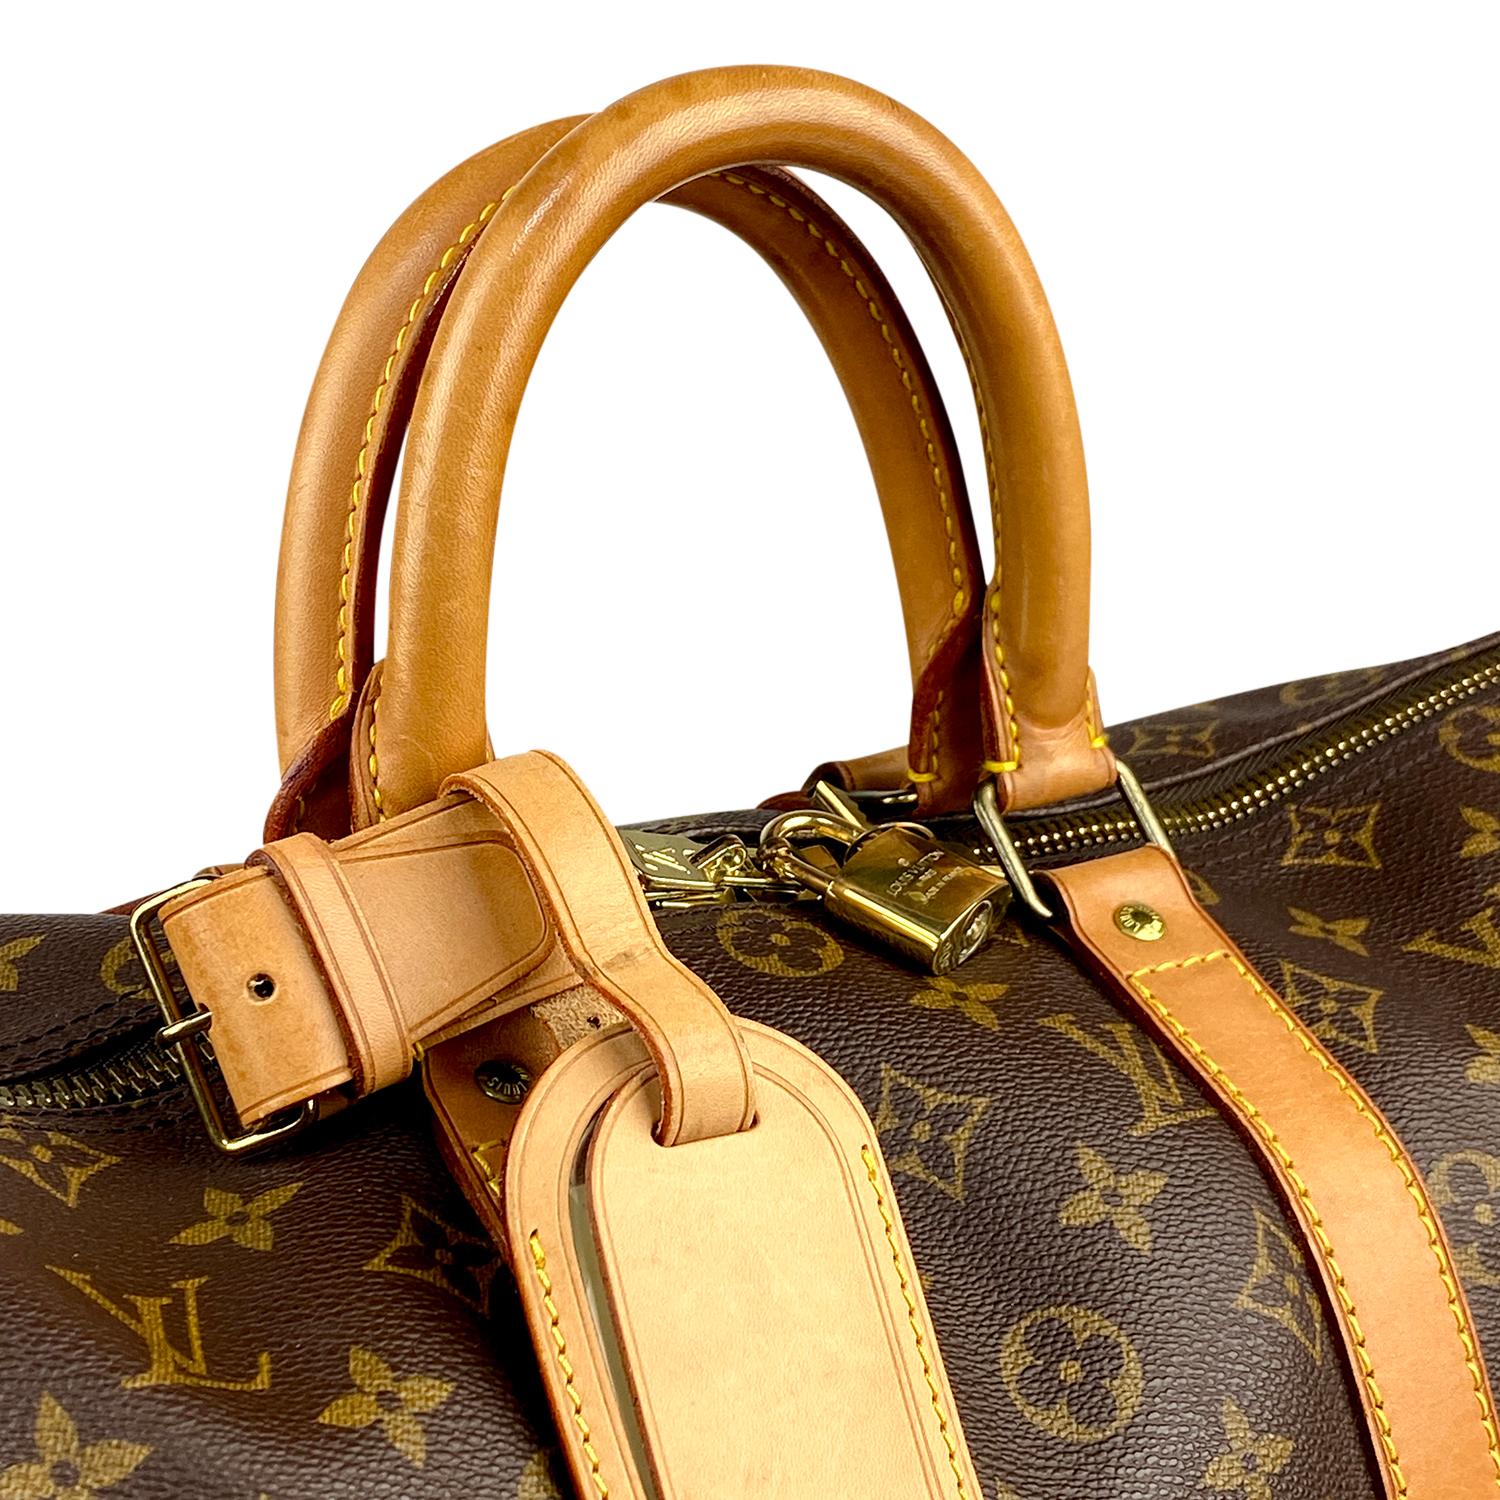 Louis Vuitton Monogram Keepall 45 In Good Condition For Sale In Sundbyberg, SE